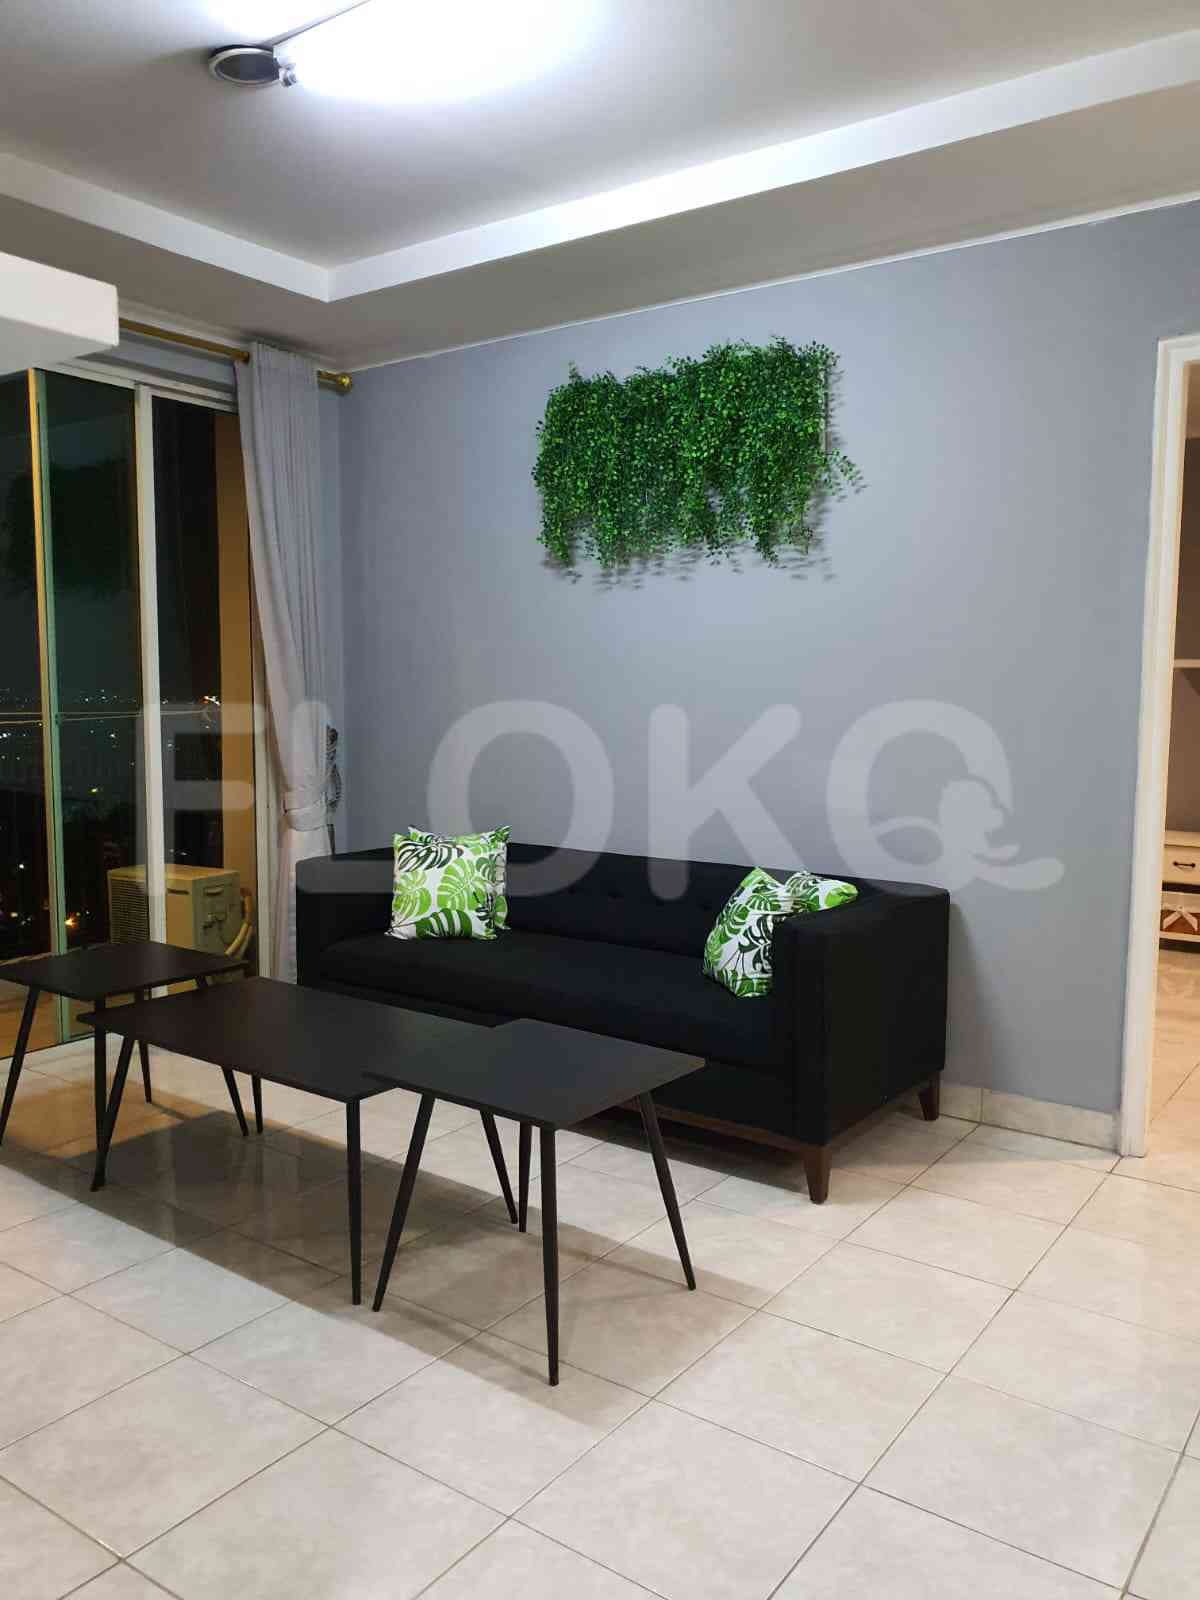 4 Bedroom on 15th Floor for Rent in MOI Frenchwalk - fke28a 2